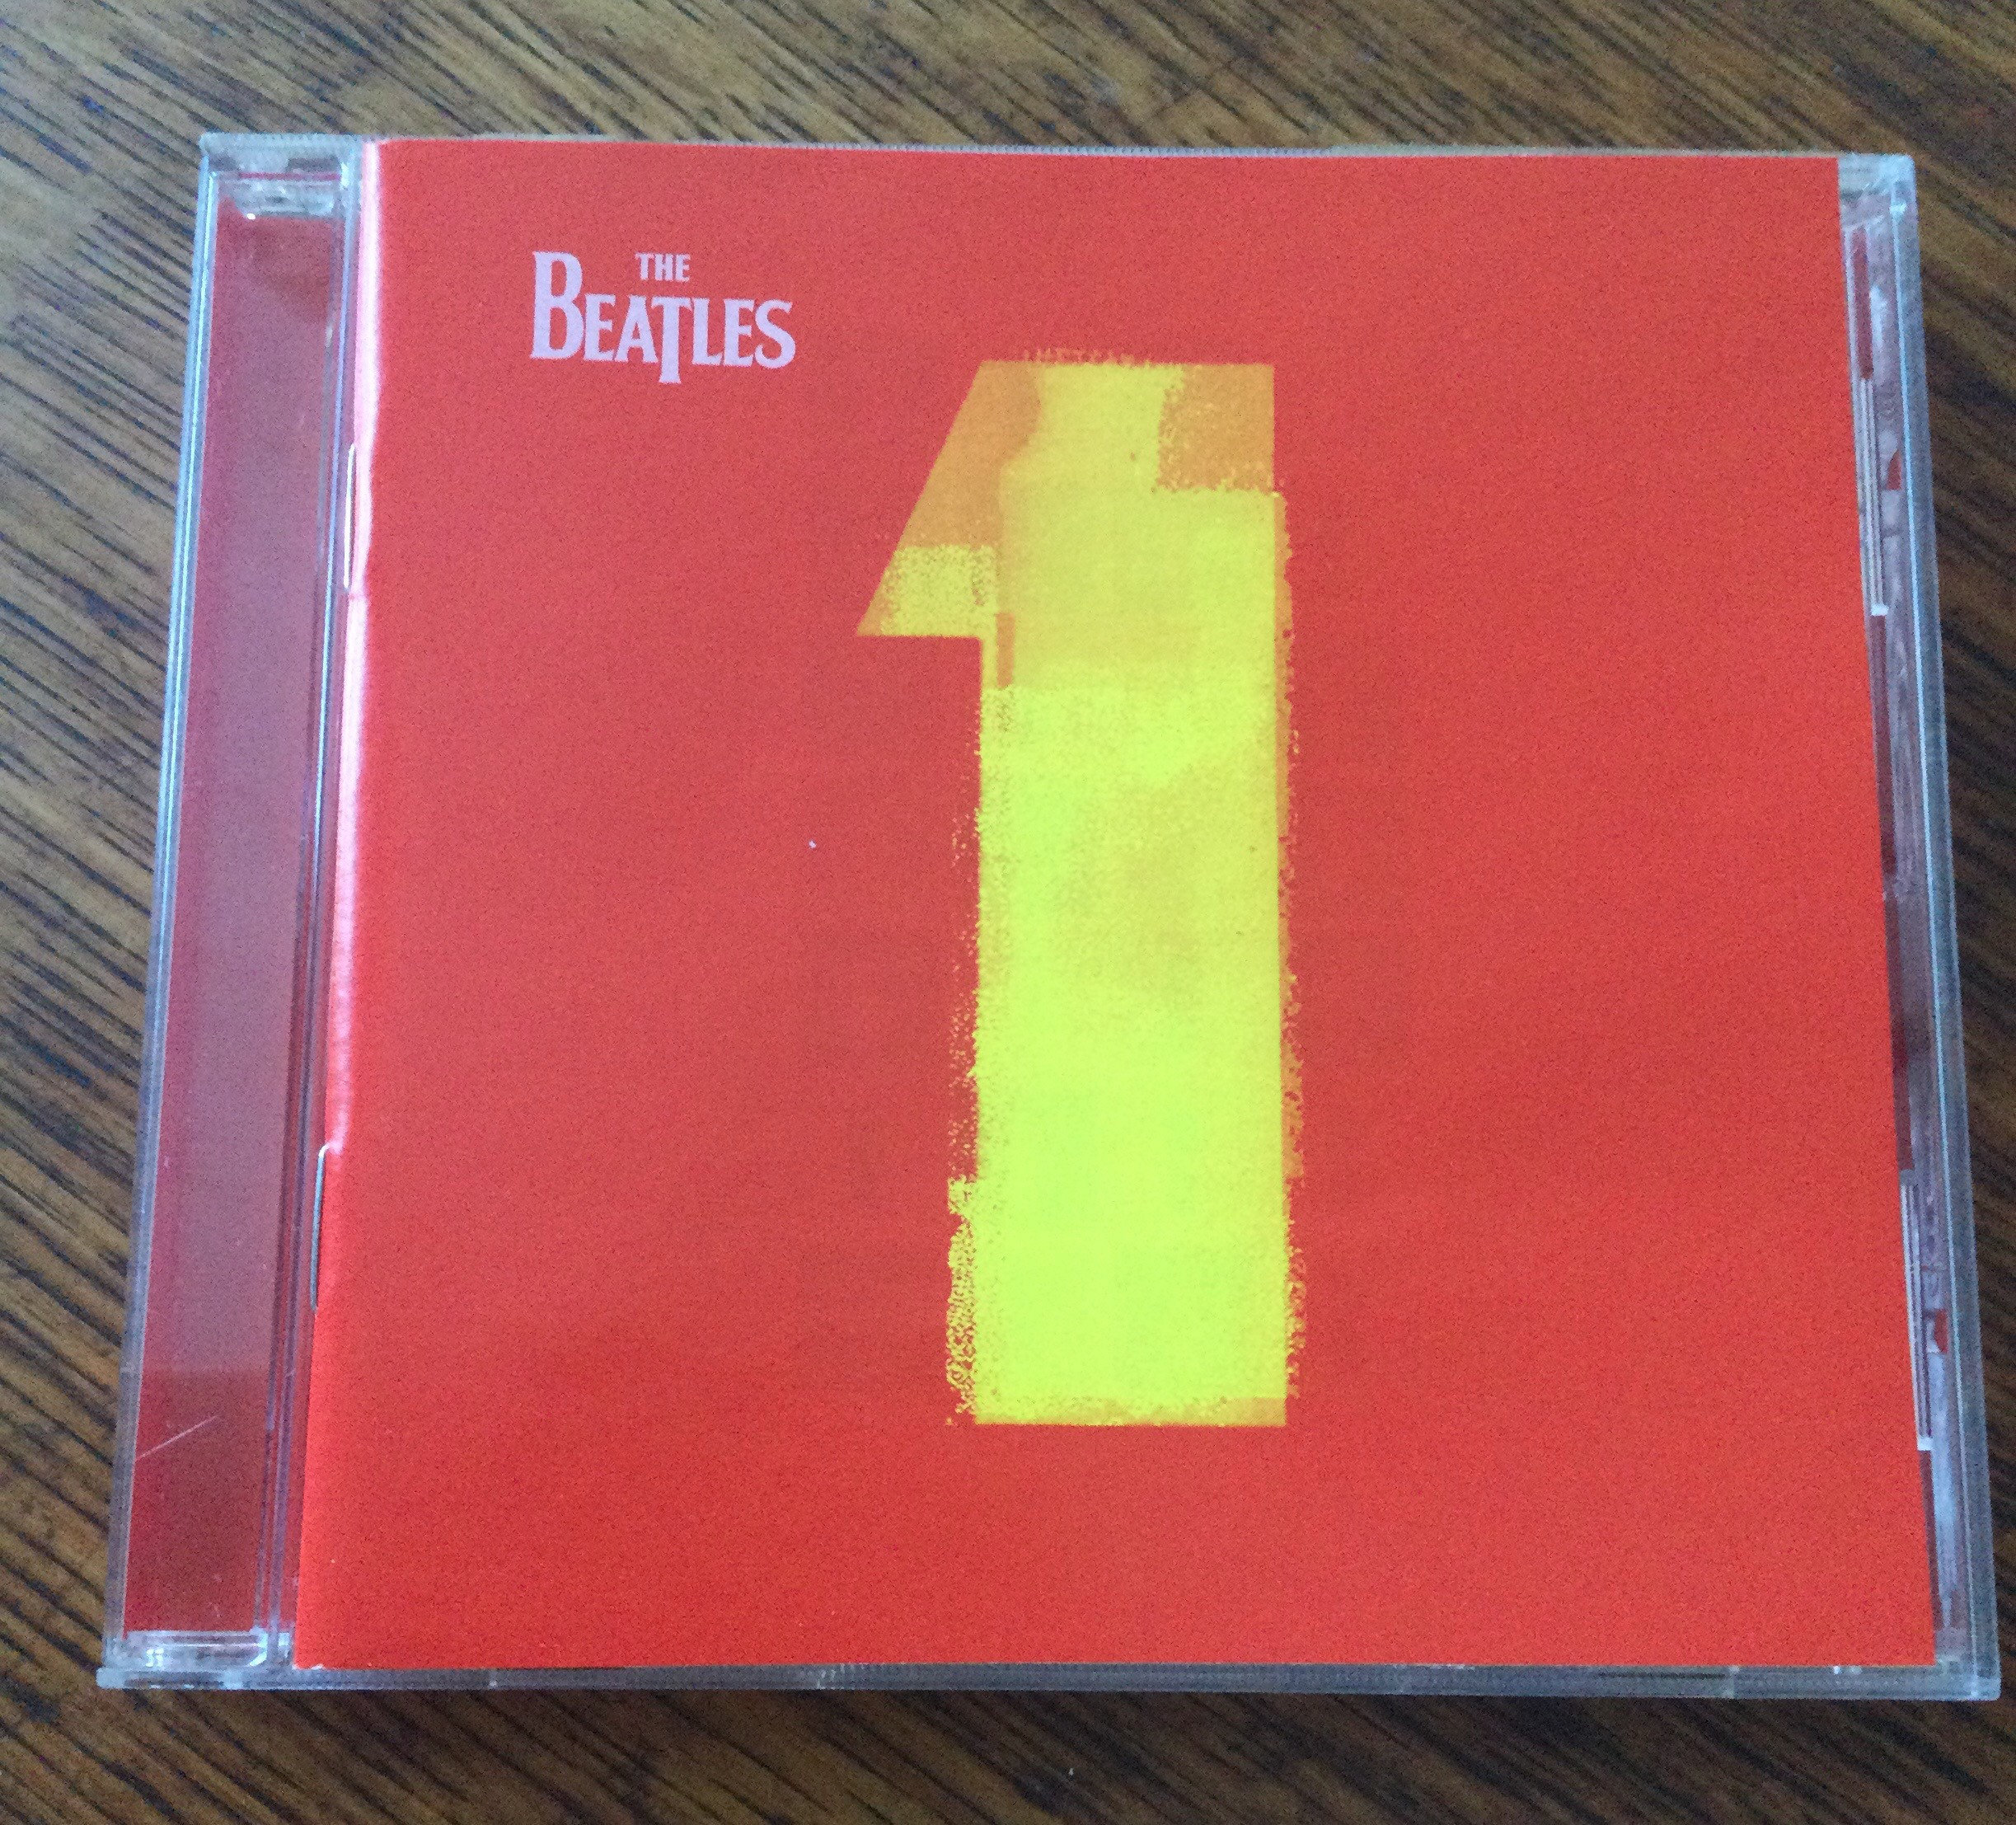 The Beatles 1 Compilation CD Capitol Records CDP 7243/5 29325 2 8 